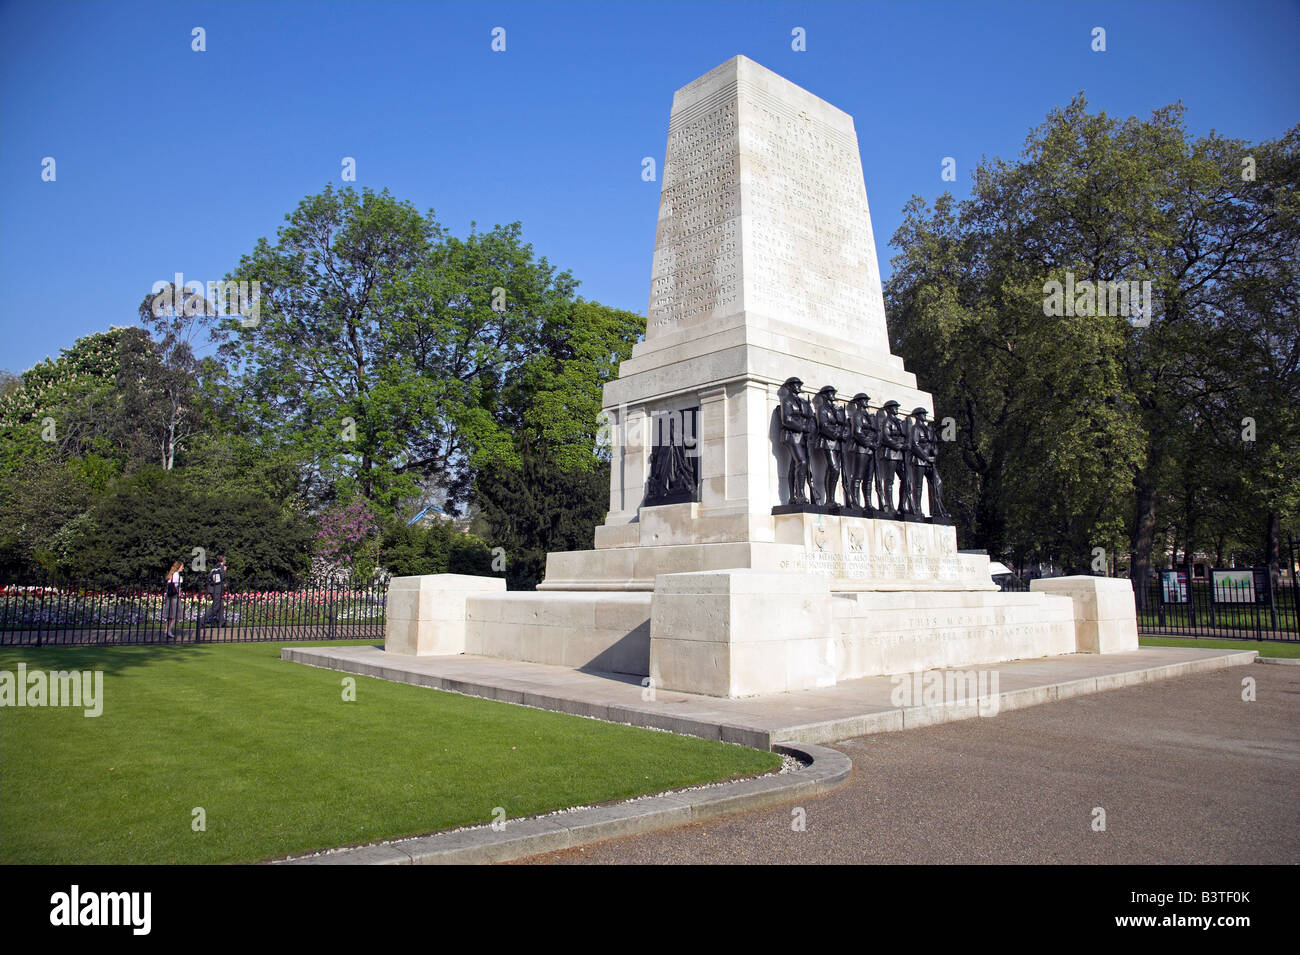 England, London, The Guards Memorial in Horseguards Parade. It was erected in 1926 and dedicated to the five Foot Guards regiments that fought in the Great War (WW1). Stock Photo